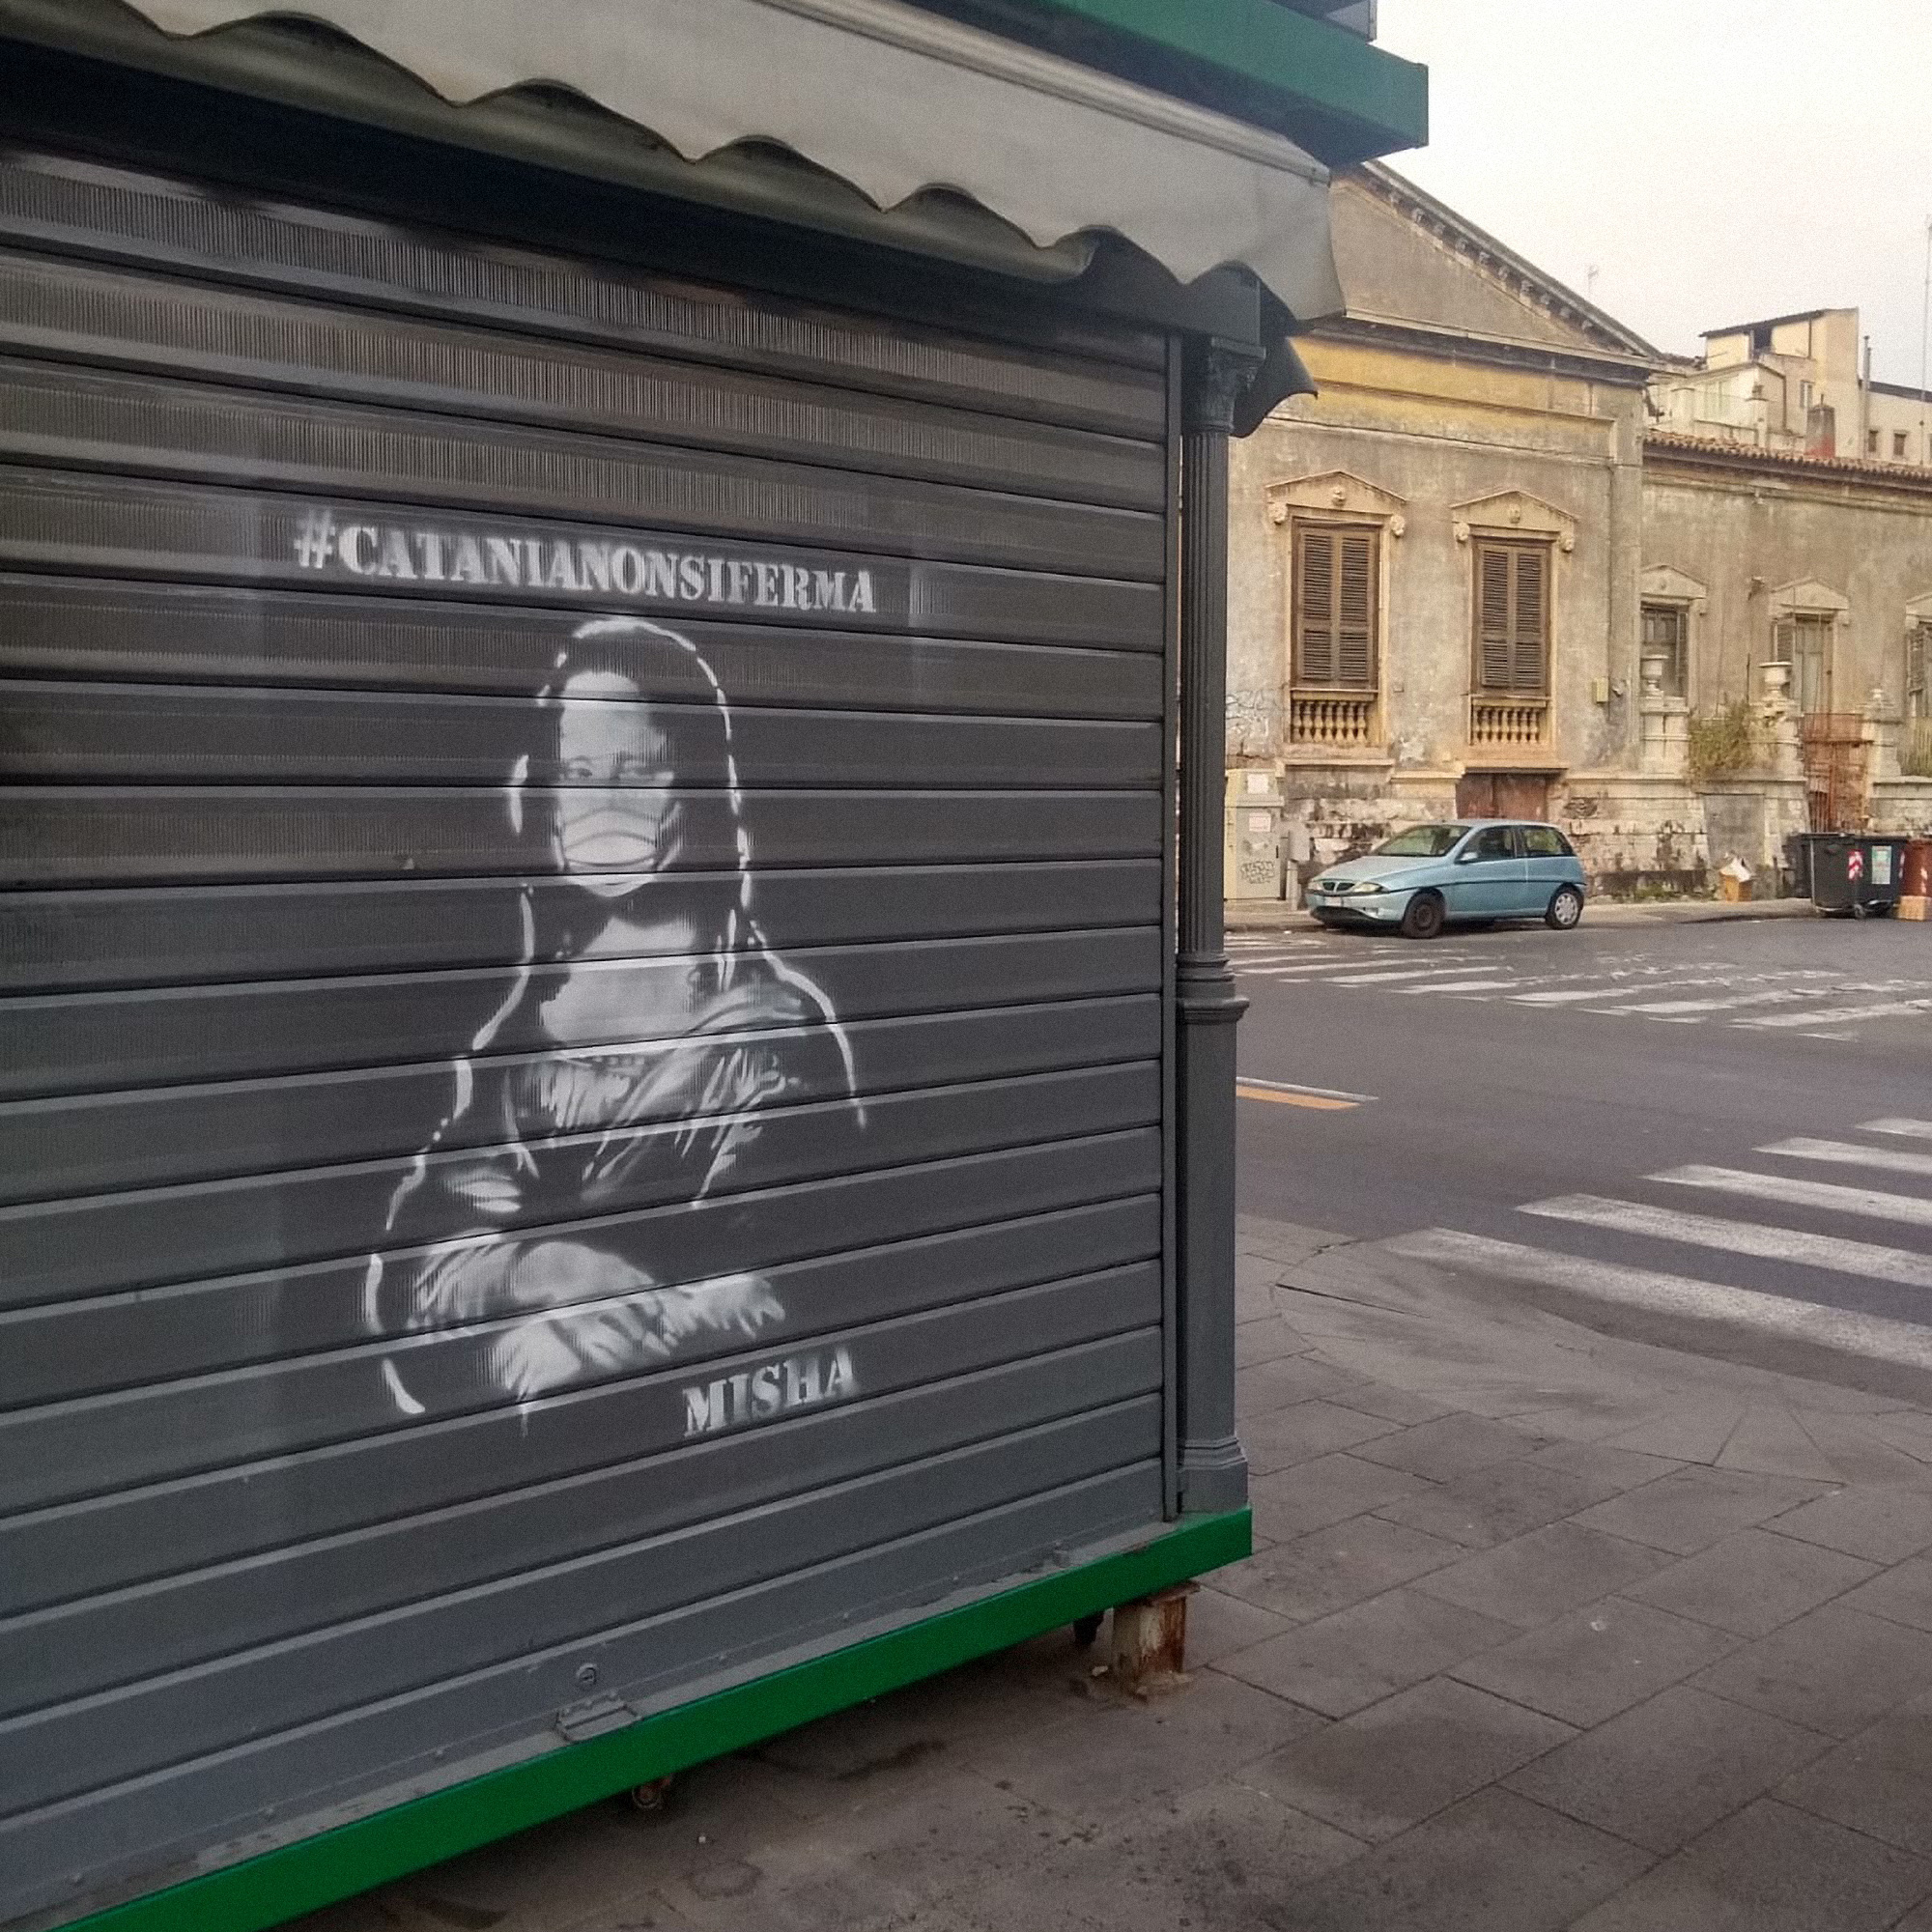 Street art in Catania Italy shows the Mona Lisa wearing a face mask